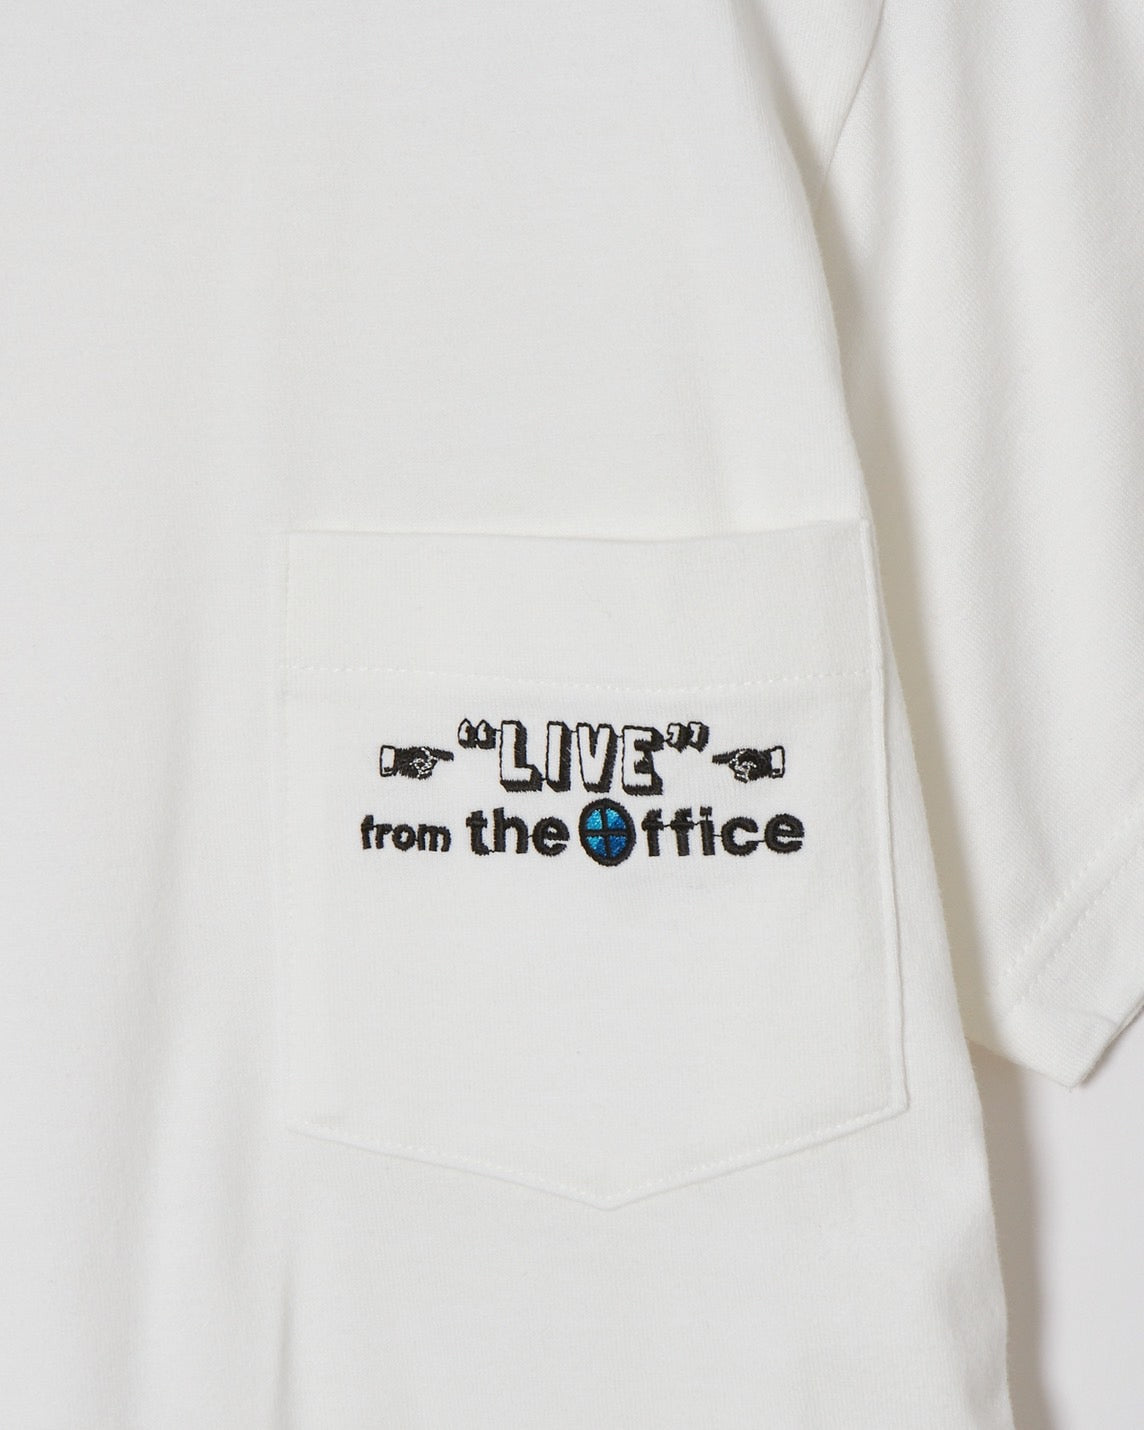 LIVEFROMTHE Office S/S T-SHIRT